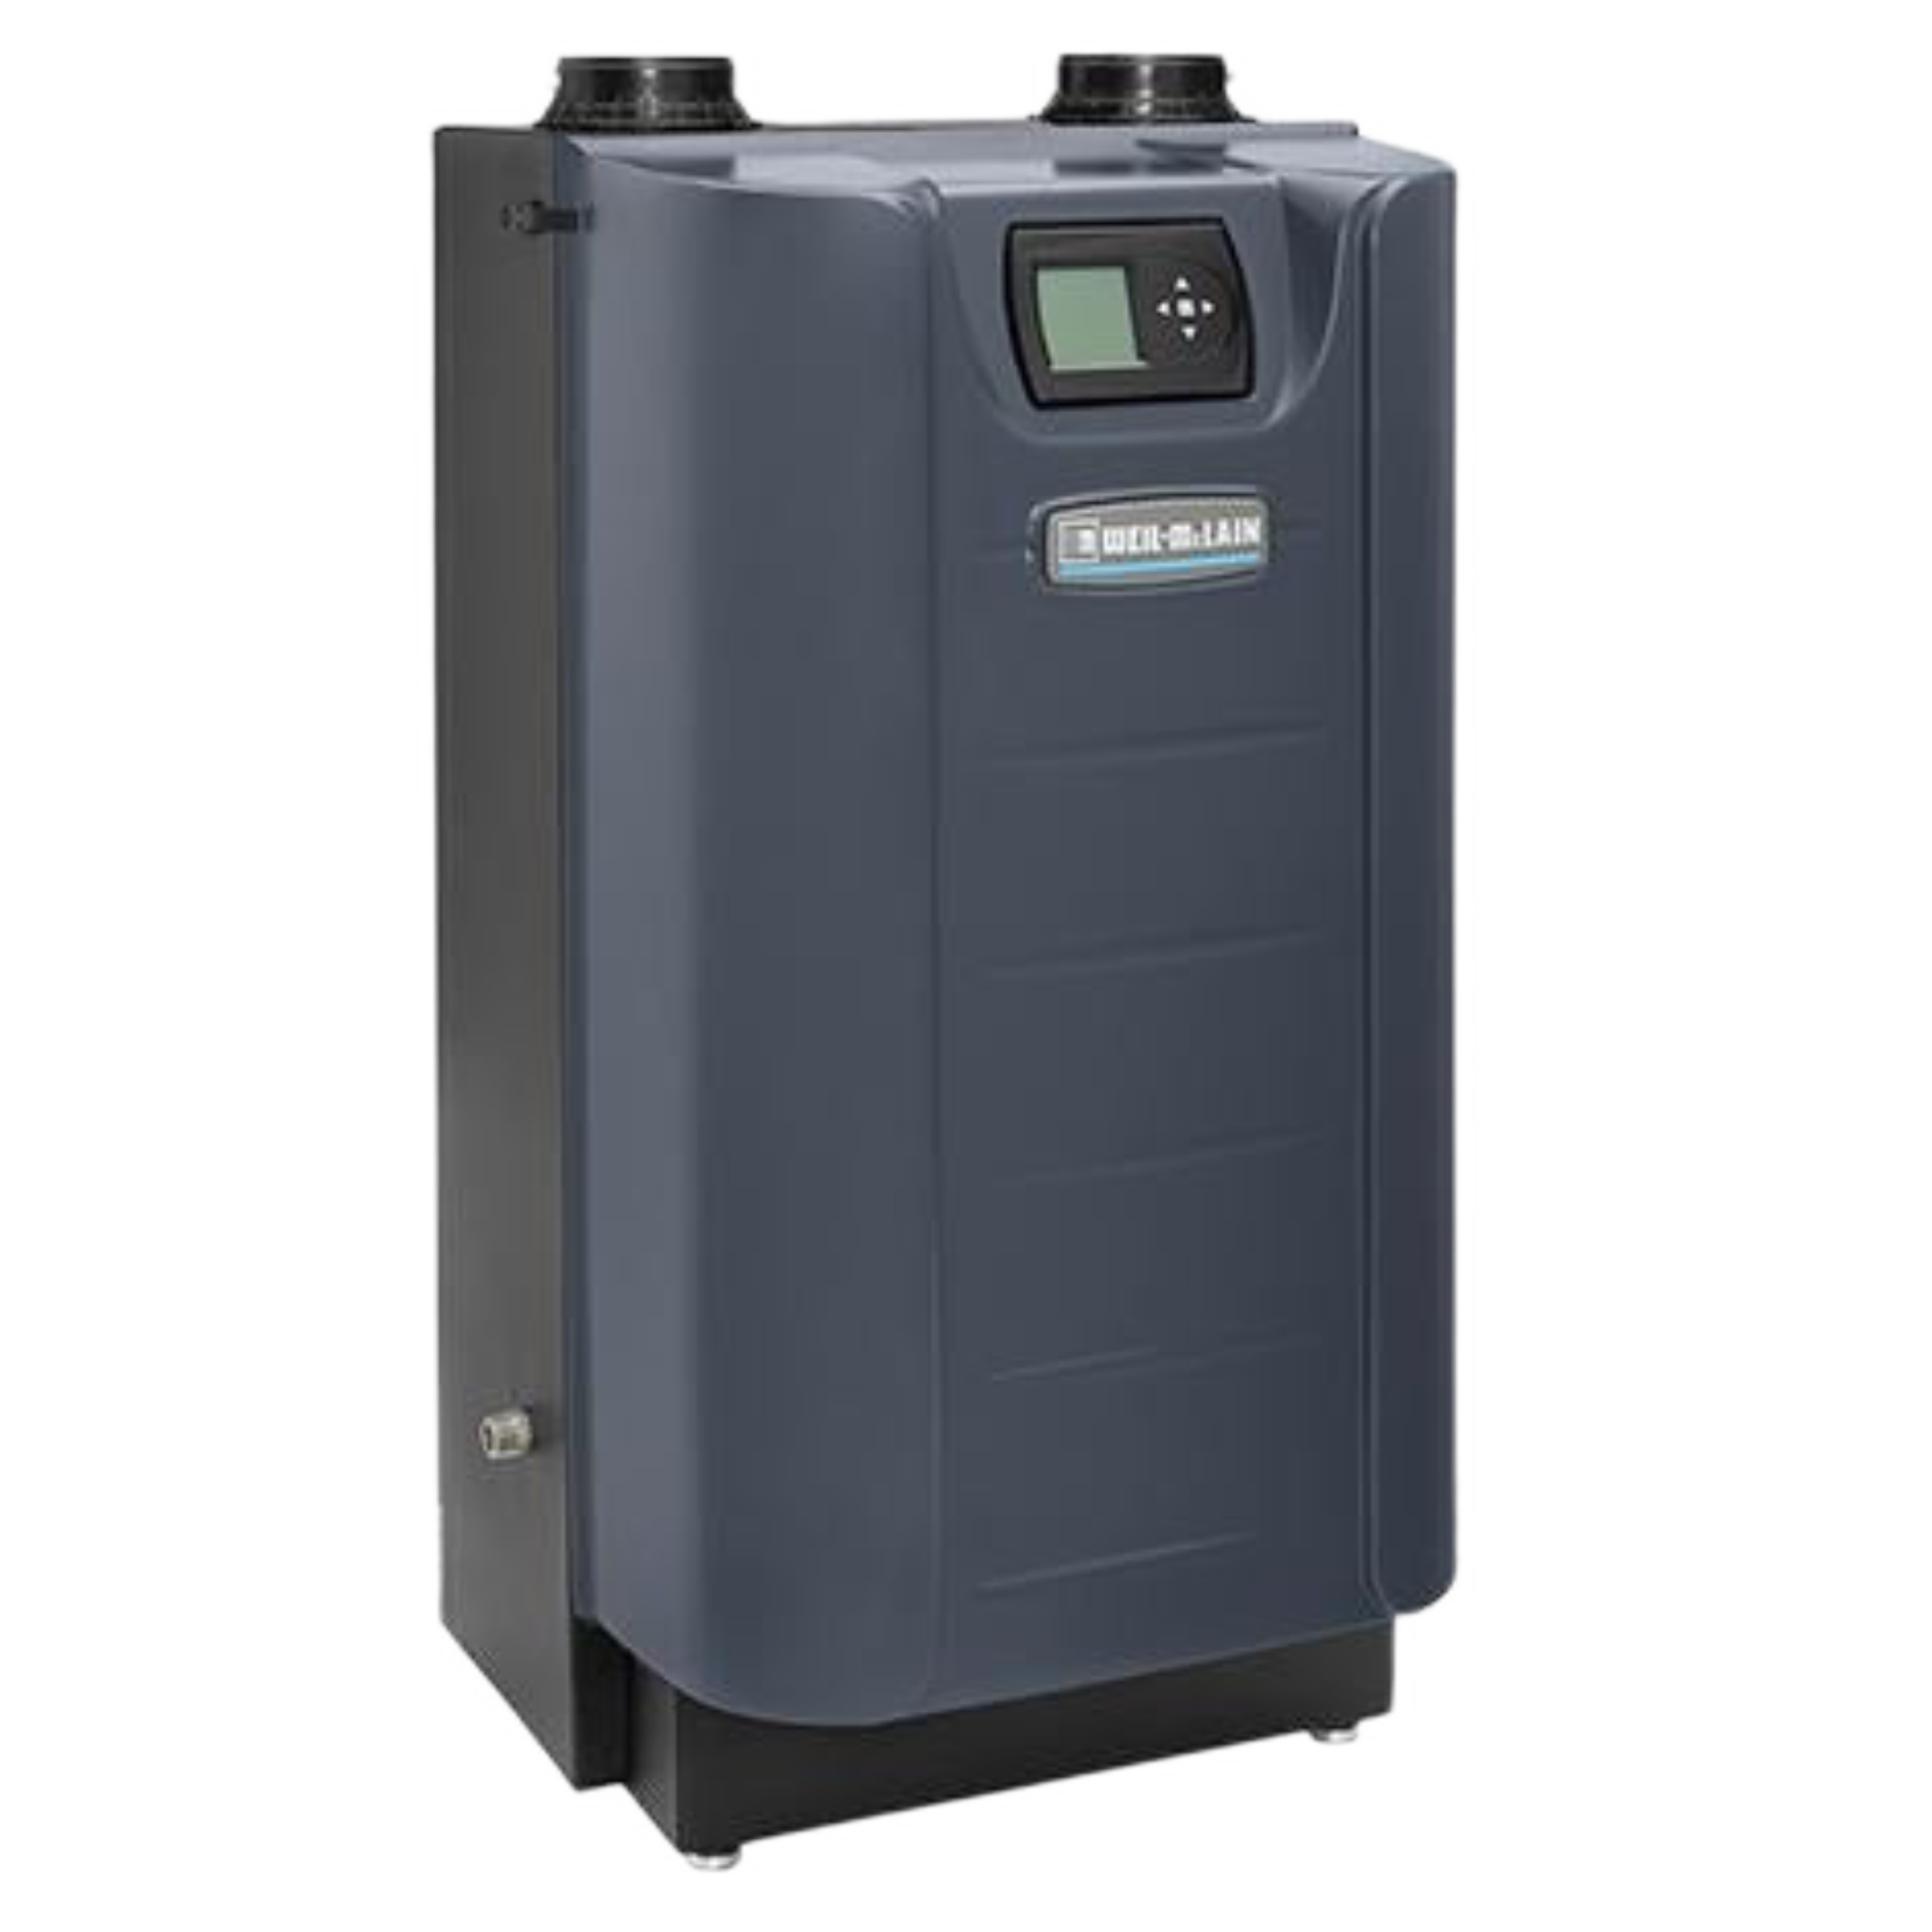 EVG-399 Weil Mclain Evergreen Pro Sereis Natural Gas High-Efficiency Condensing Boiler 399,000 BTU 95.5 % AFUE 6.7 GAL for Residential
and Light-Commercial Use, Energy Star Qualified